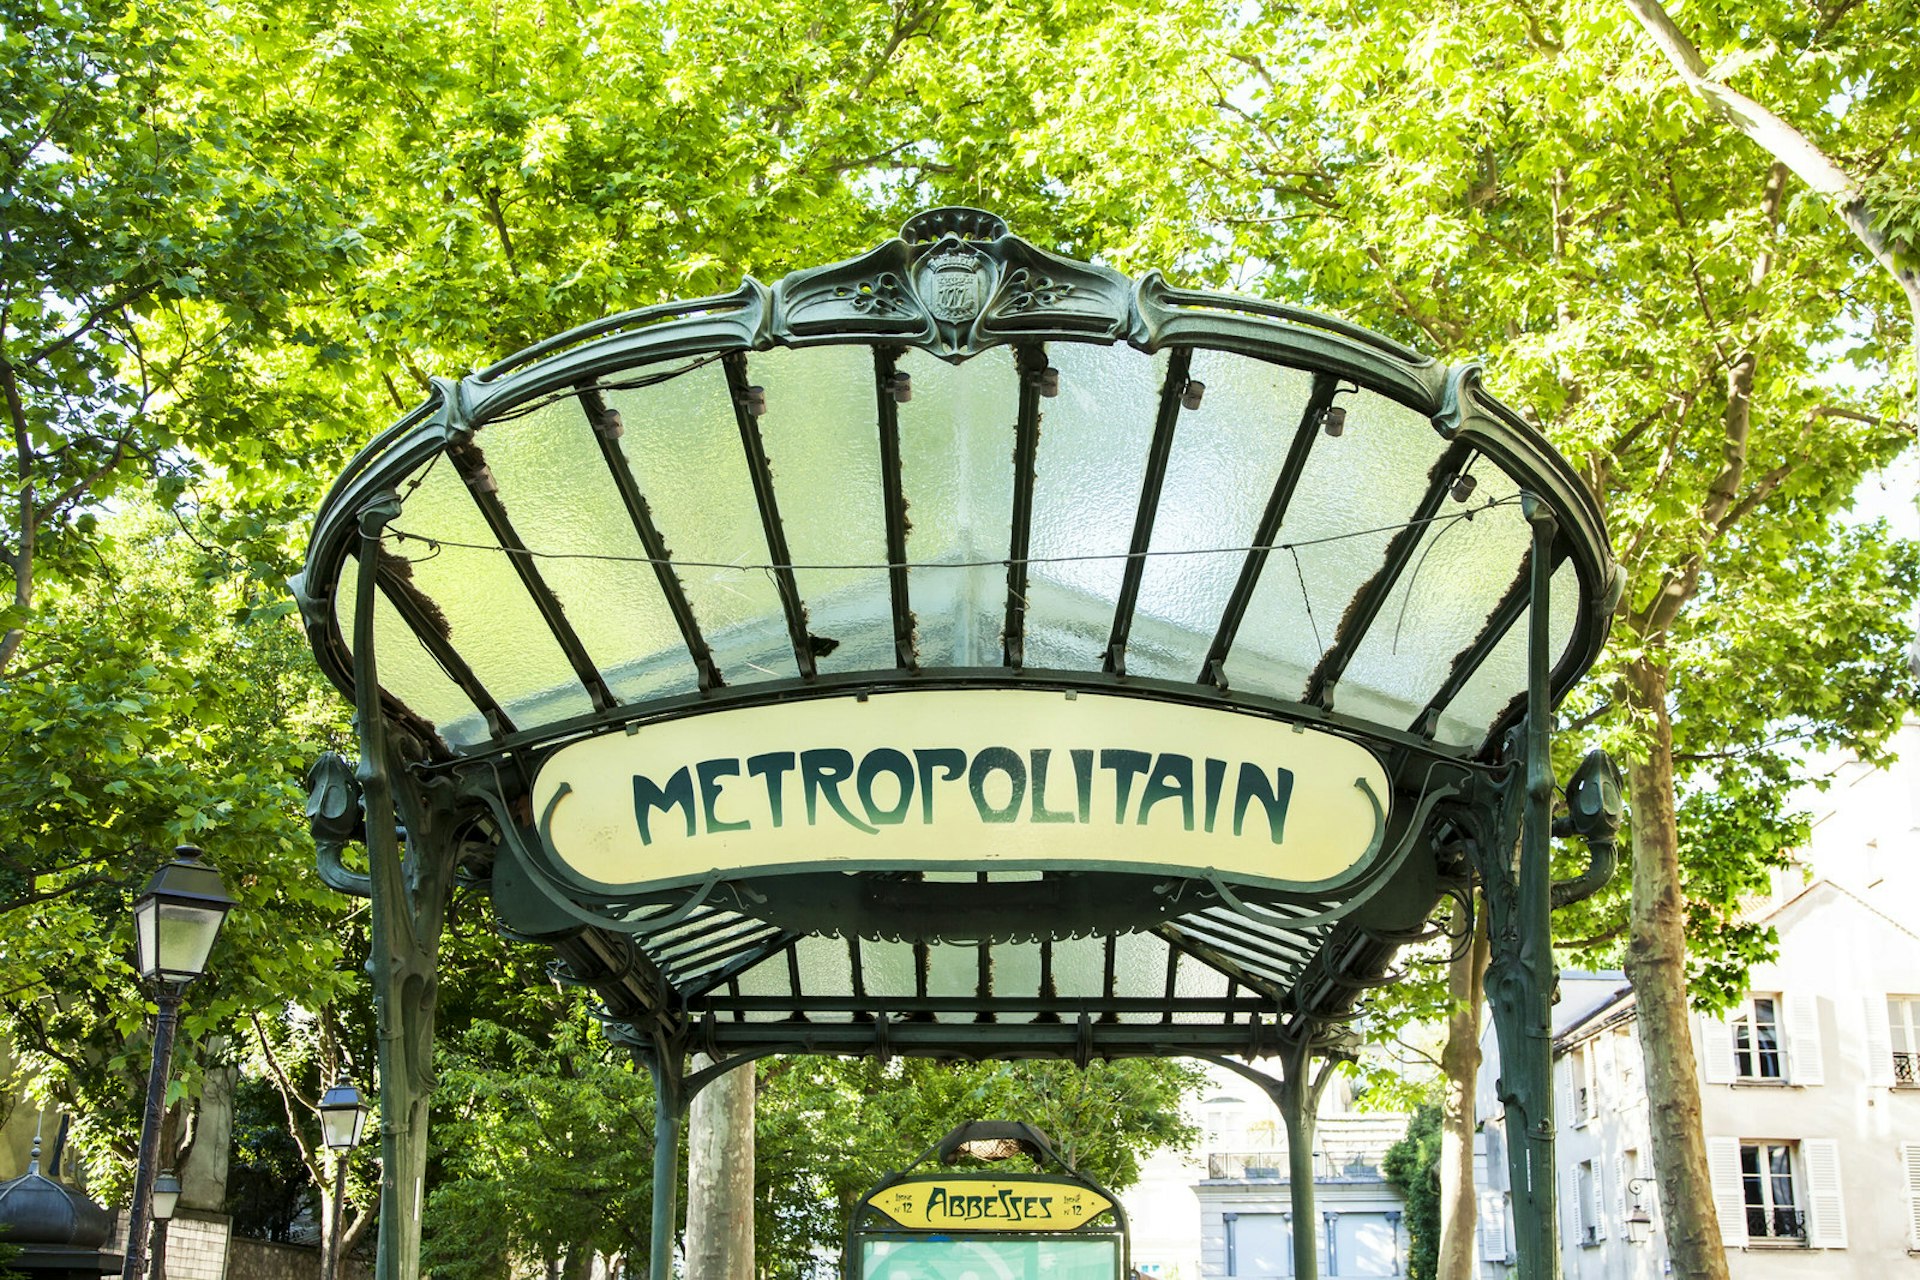 Art deco sign for the Abbesses metro station stating 'metropolitain' with green trees in the background